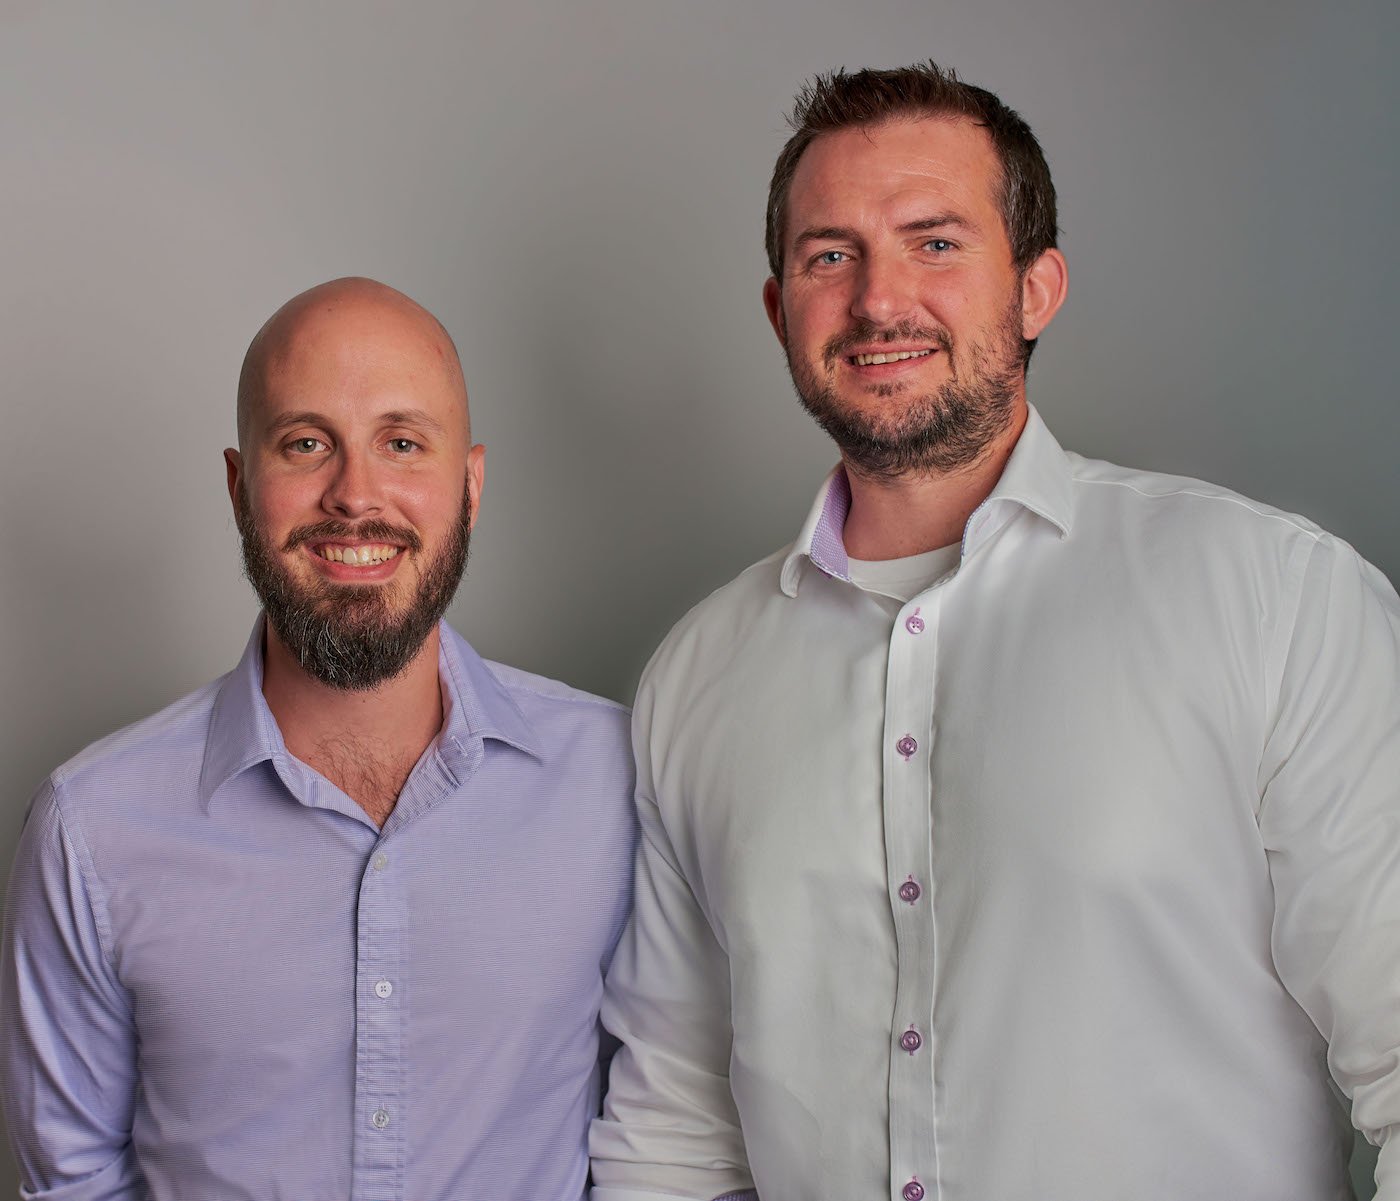 Lendflow was founded in 2019 by Jon Fry, left, and Matthew Watts.